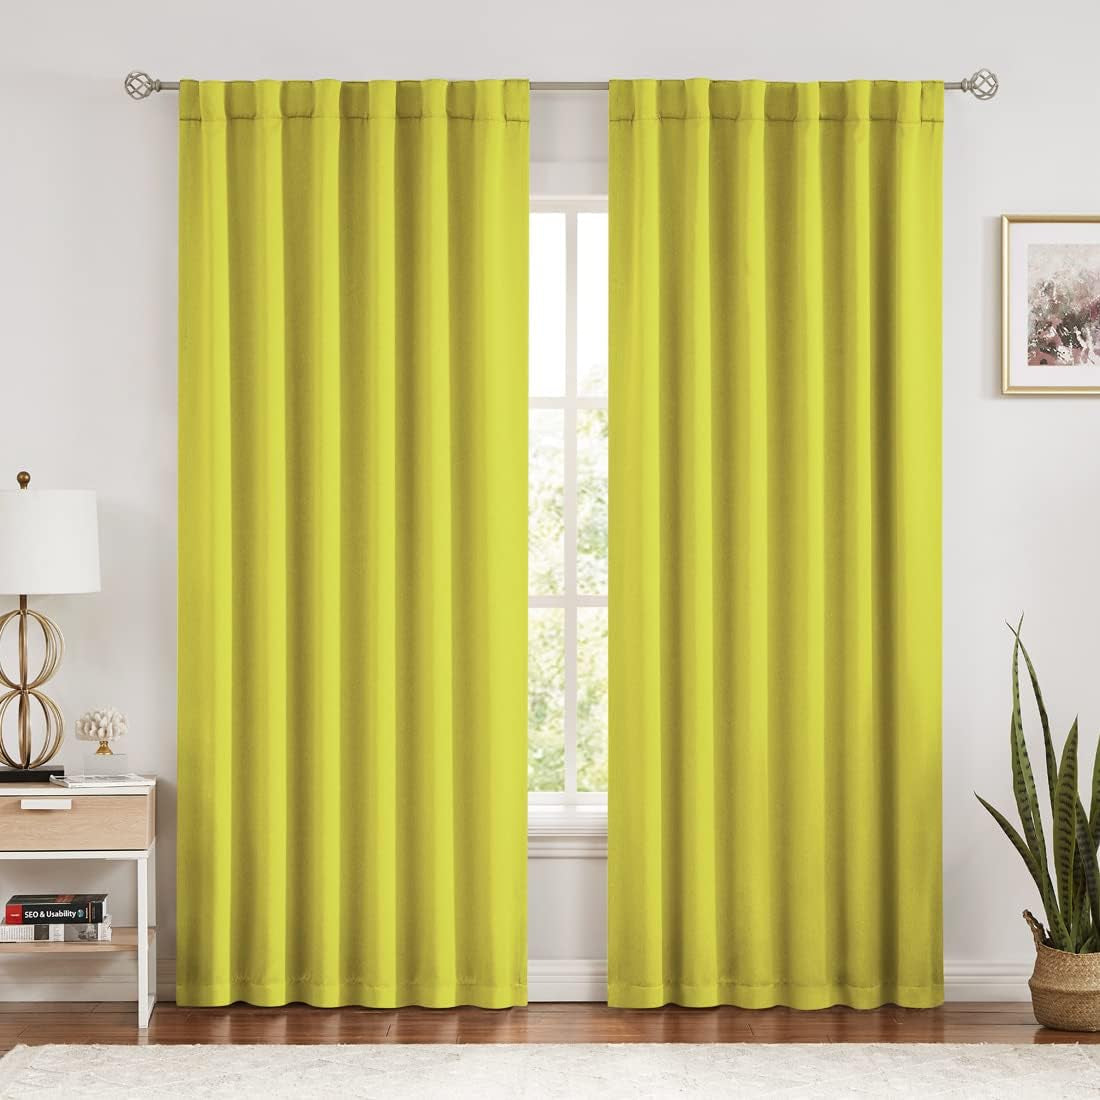 Yellow Blackout Curtains 84 Inches Long for Bedroom Living Room, Back Tab/Rod Pocket 52" Wide Window Treatments Set 2 Panels, Thermal Insulated Triple Weave Drapes  Metro Parlor   